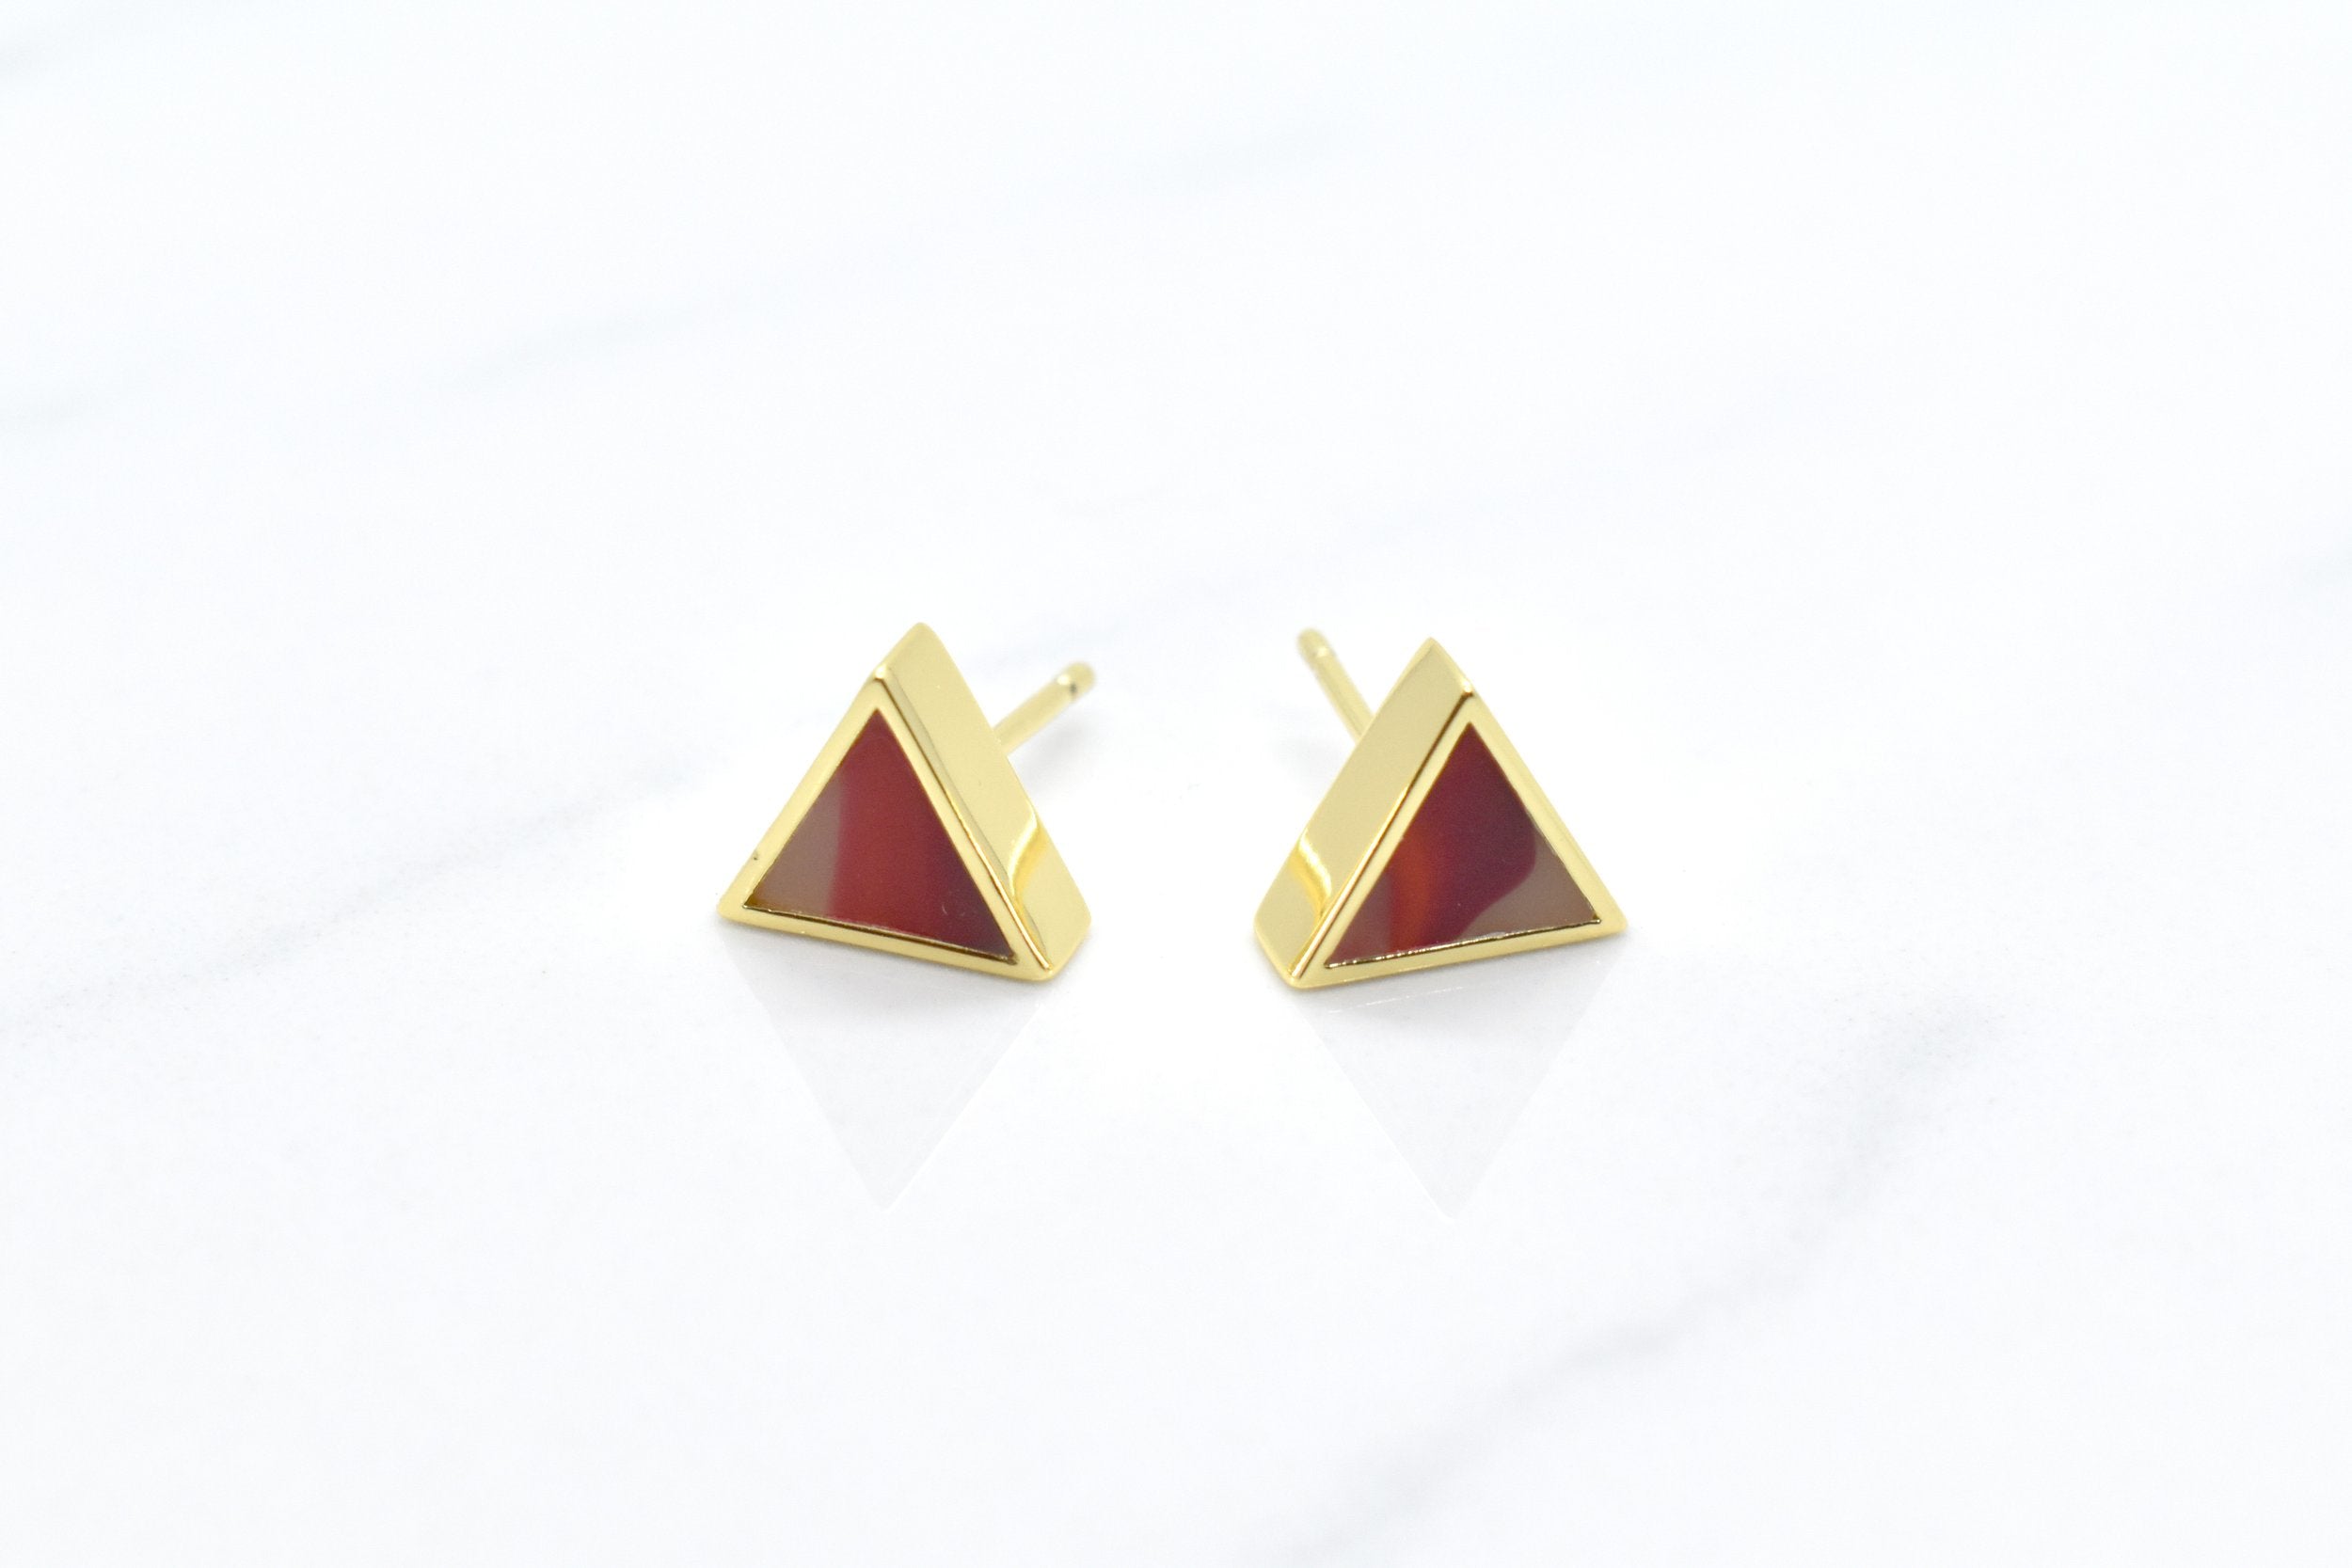 gold triangle stud earring set in ruby gemstone like clay against a white background